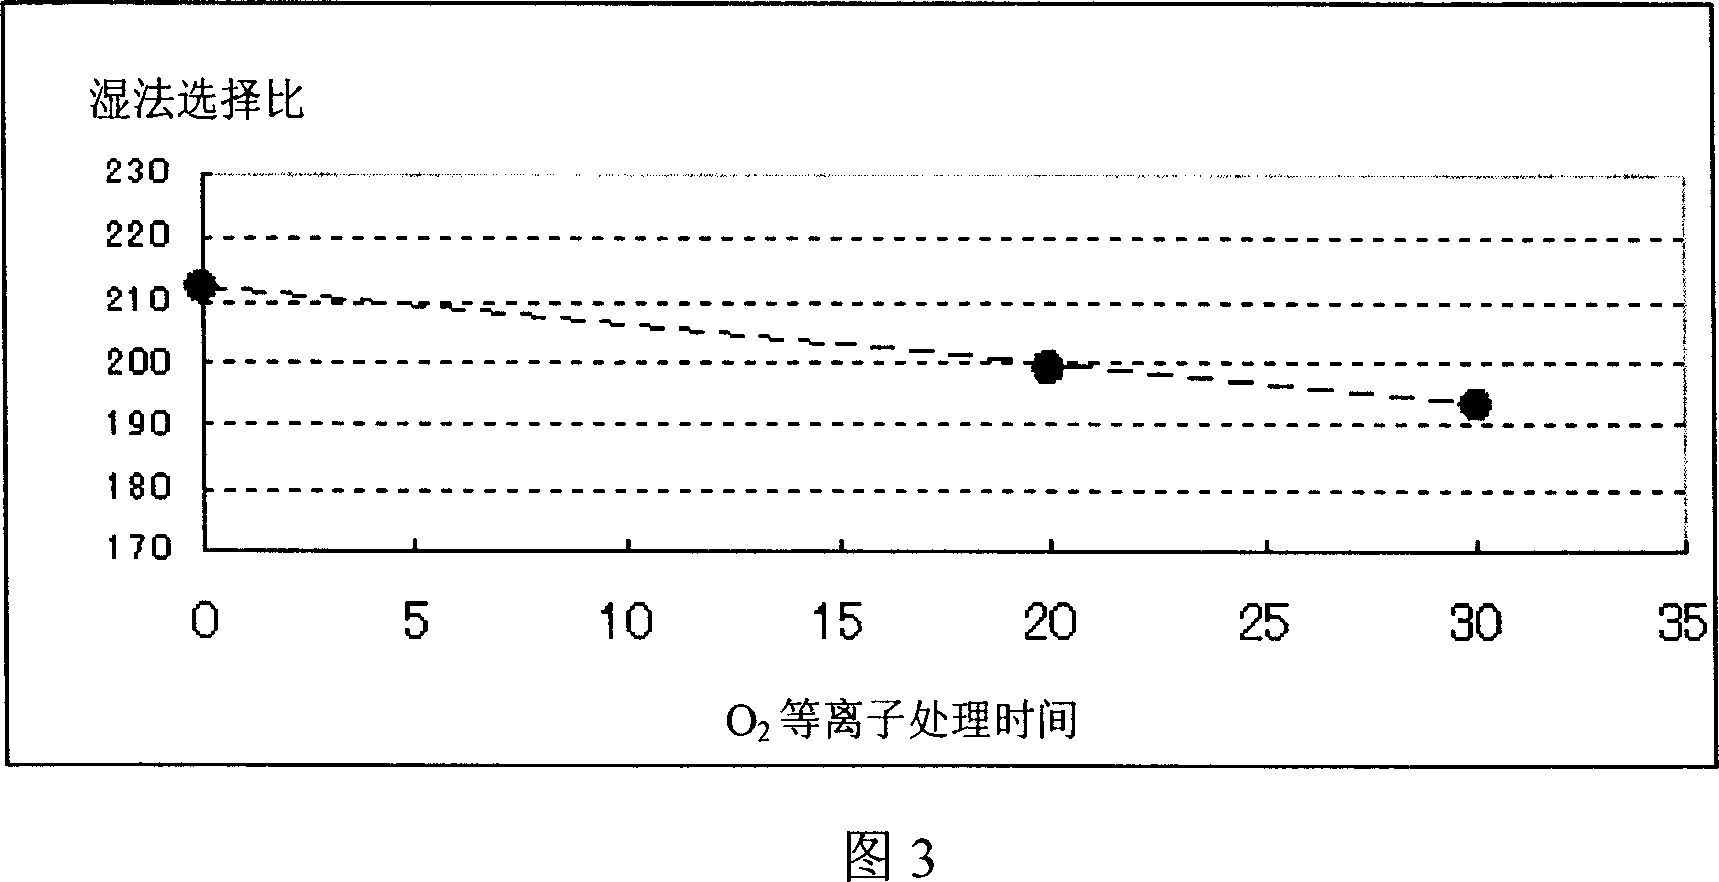 Production of semiconductor anti-reflective layer